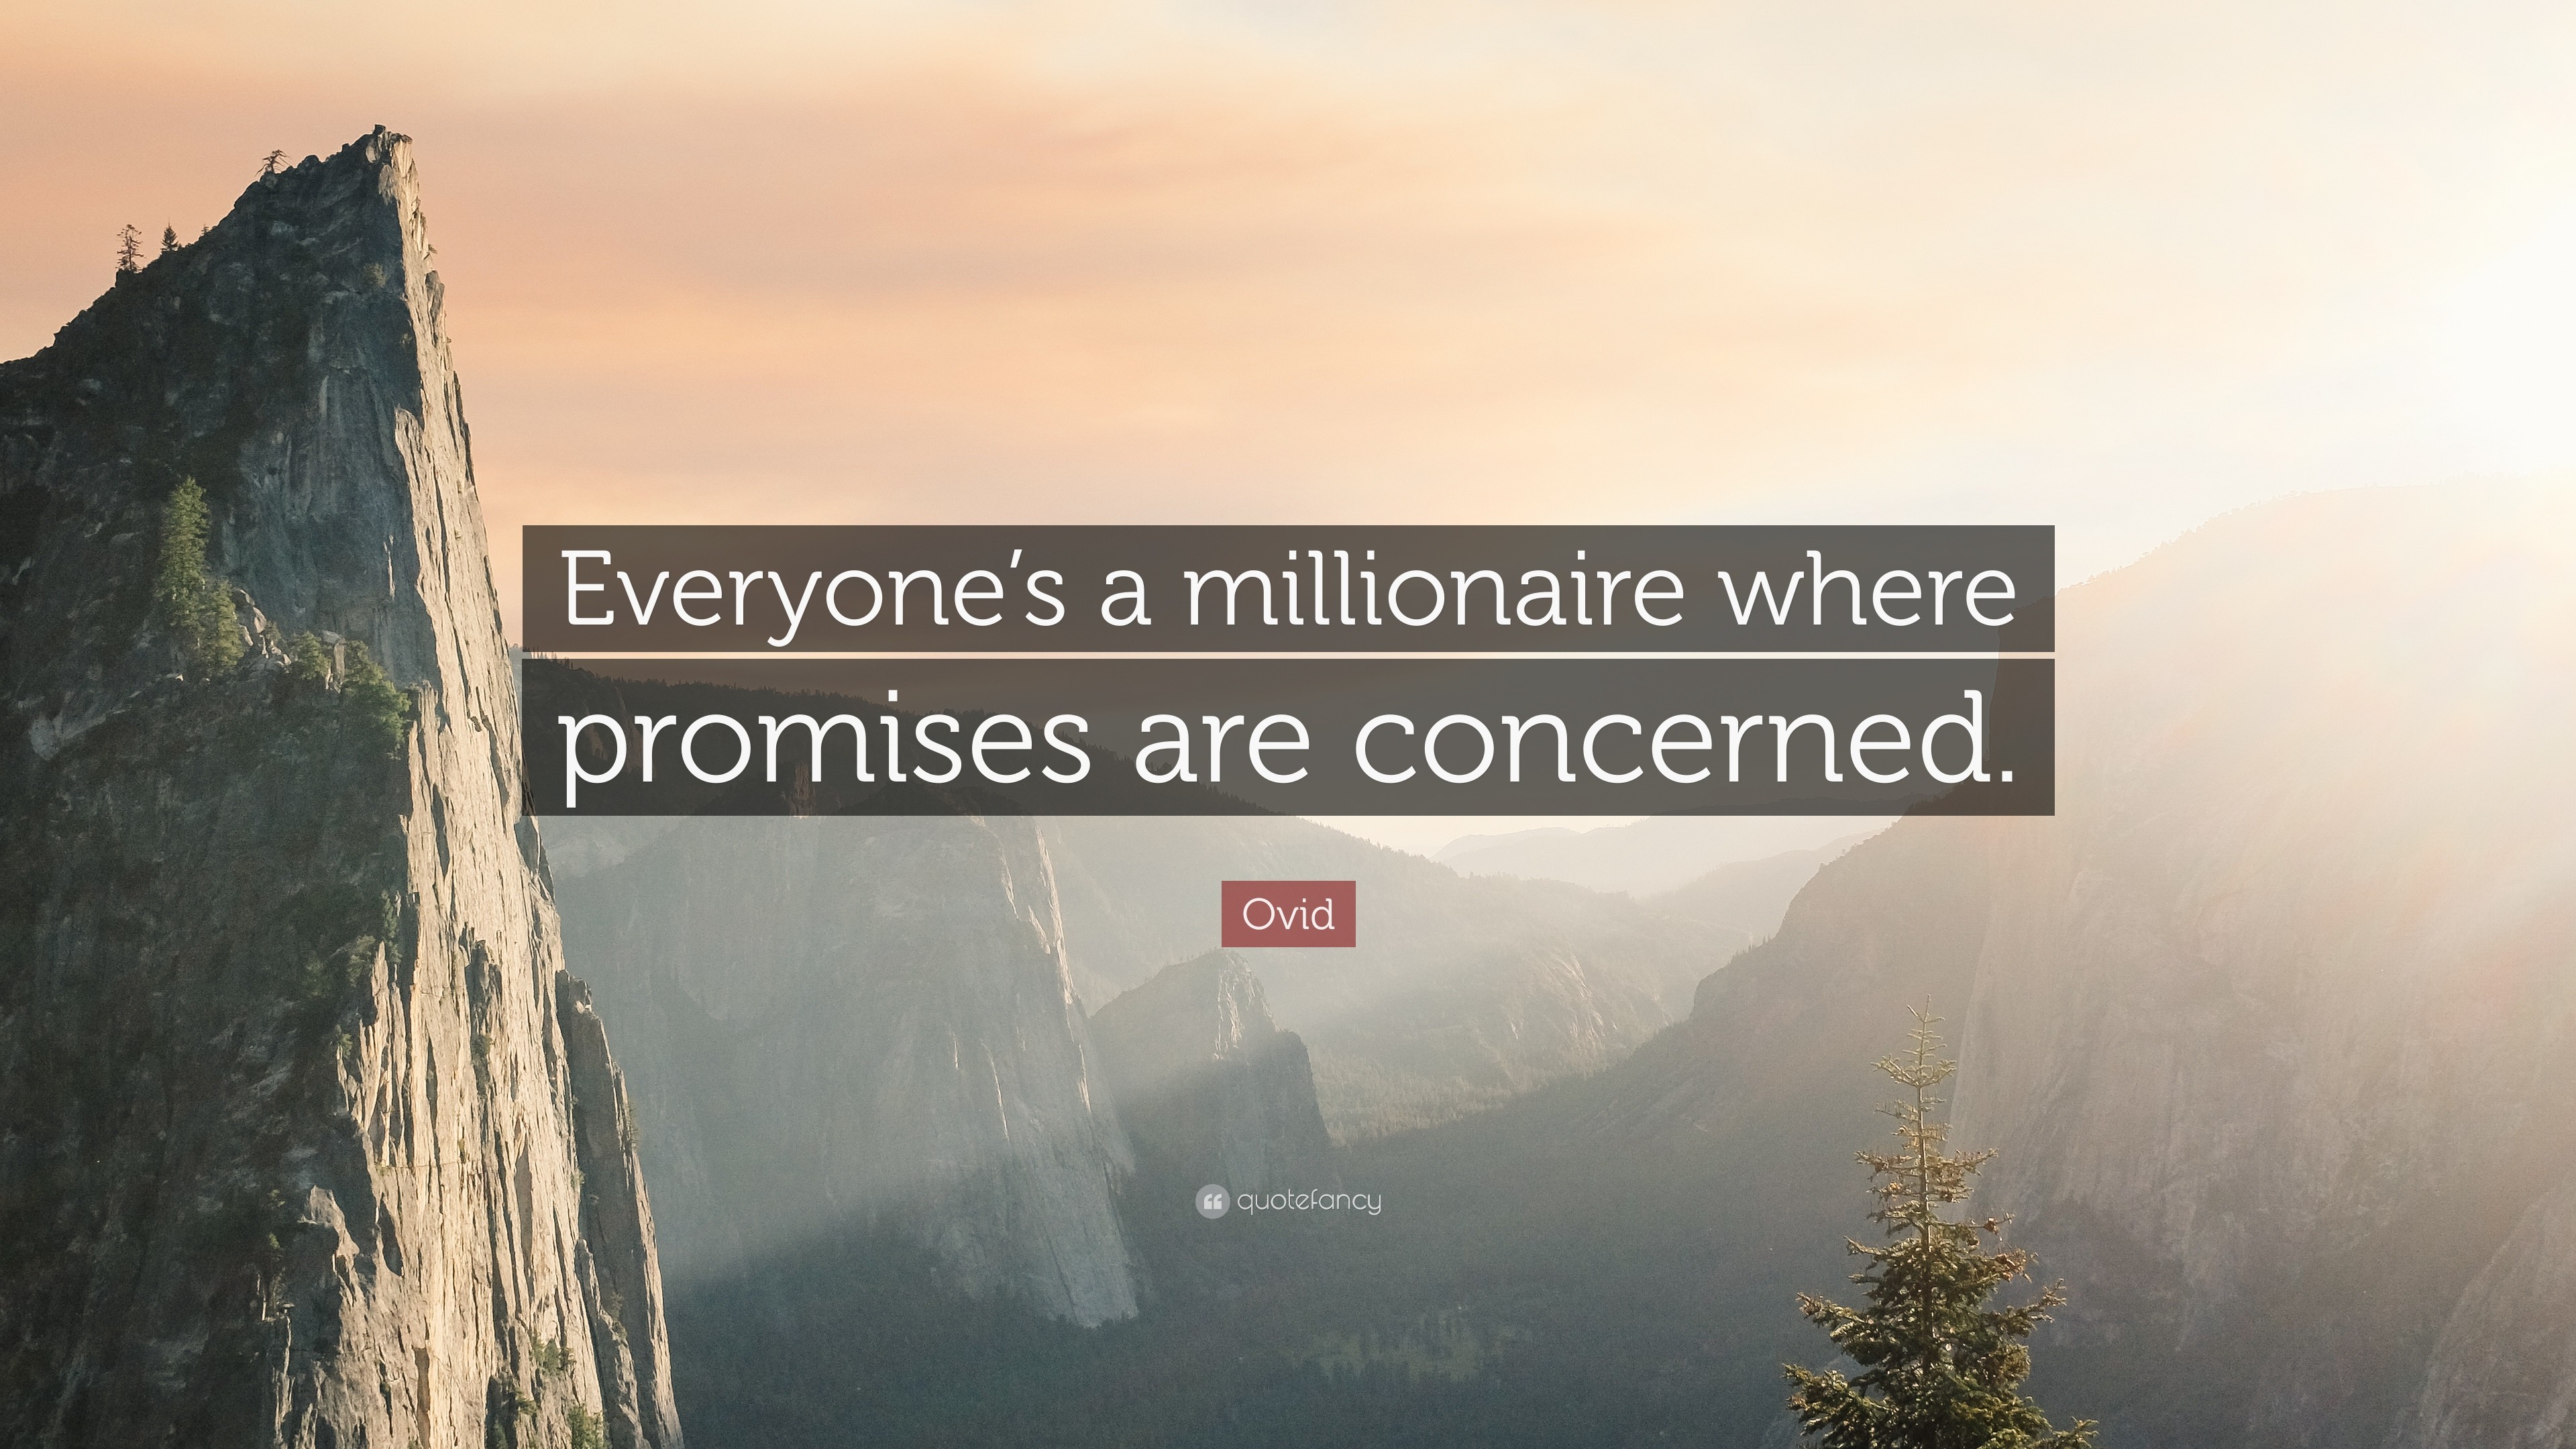 3840x2160 Ovid Quote: “Everyone's a millionaire where promises are concerned.”